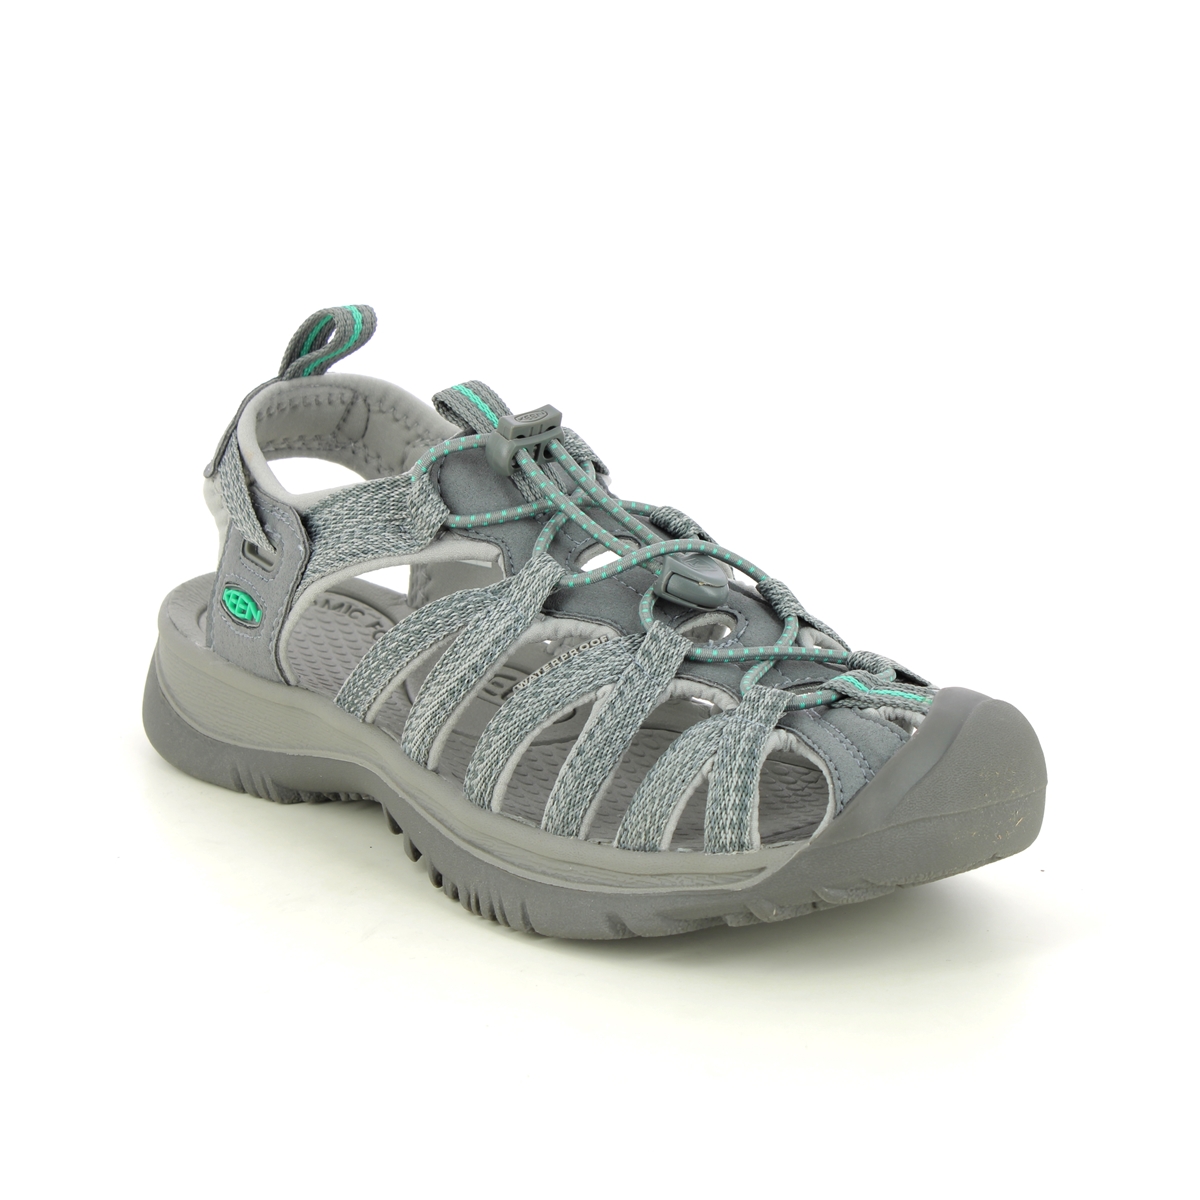 Keen Whisper Charcoal Womens Closed Toe Sandals 1022814- in a Plain Textile in Size 7